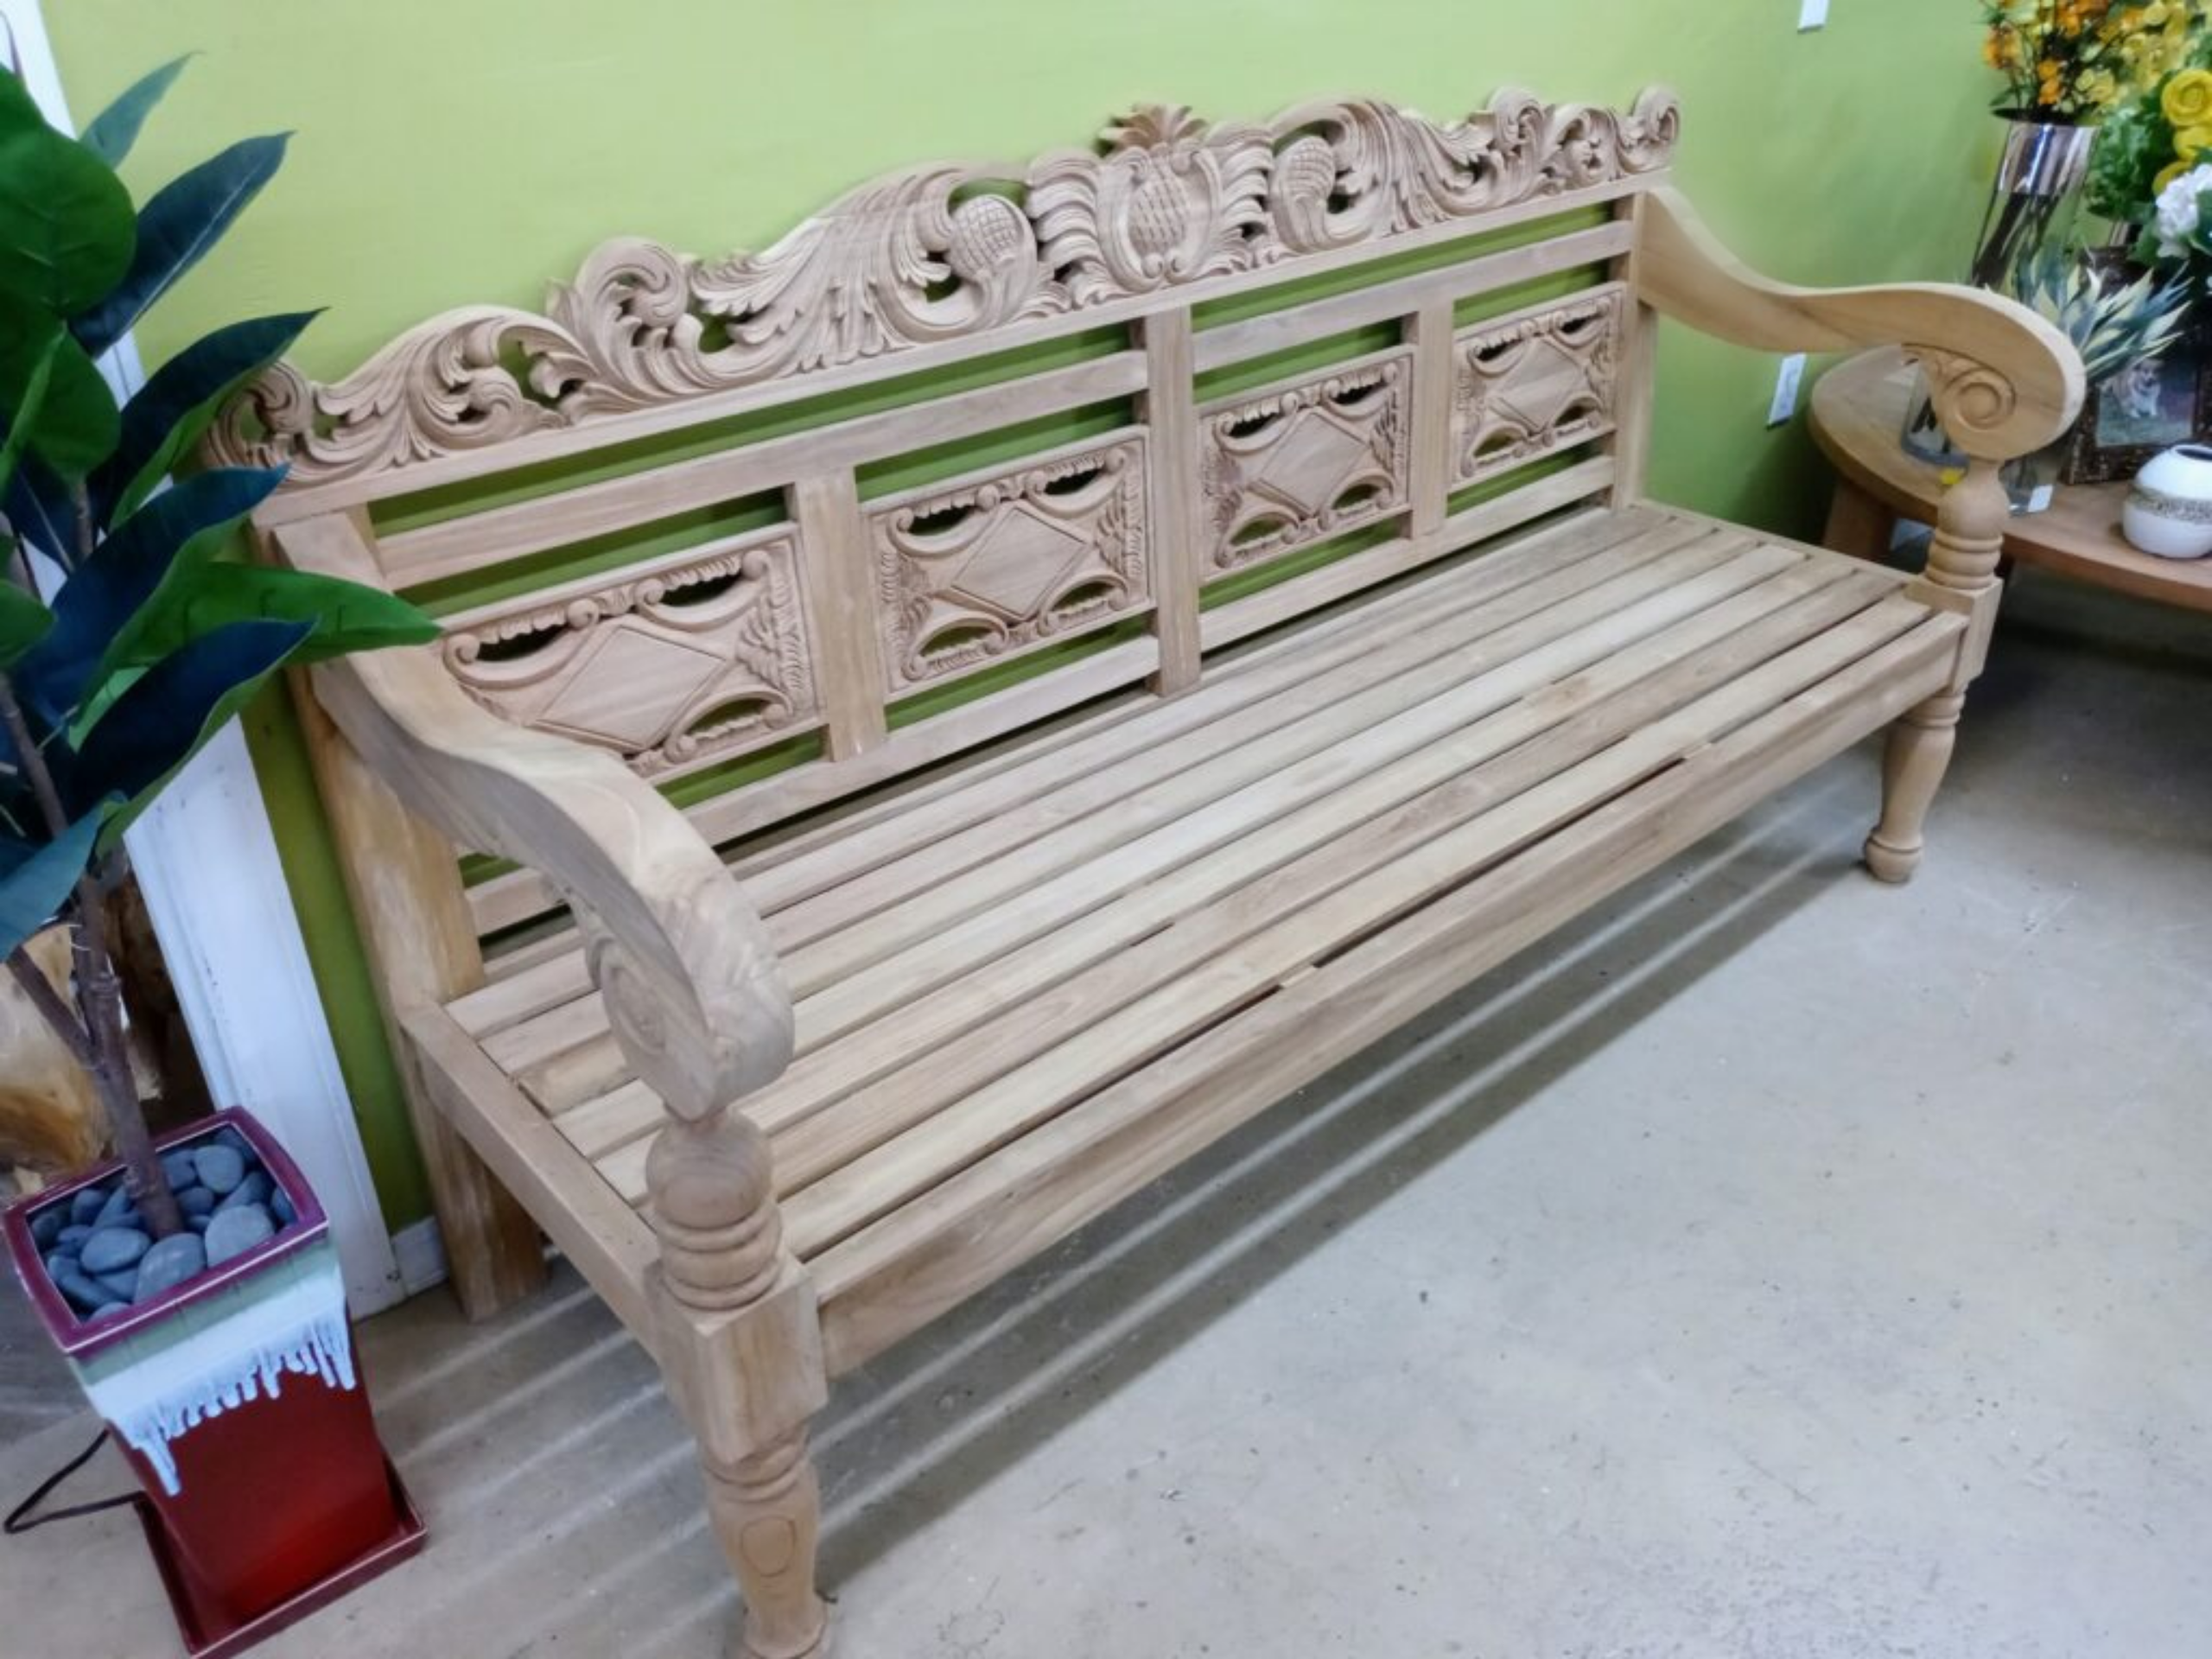 Geometric Carved Wooden Bench